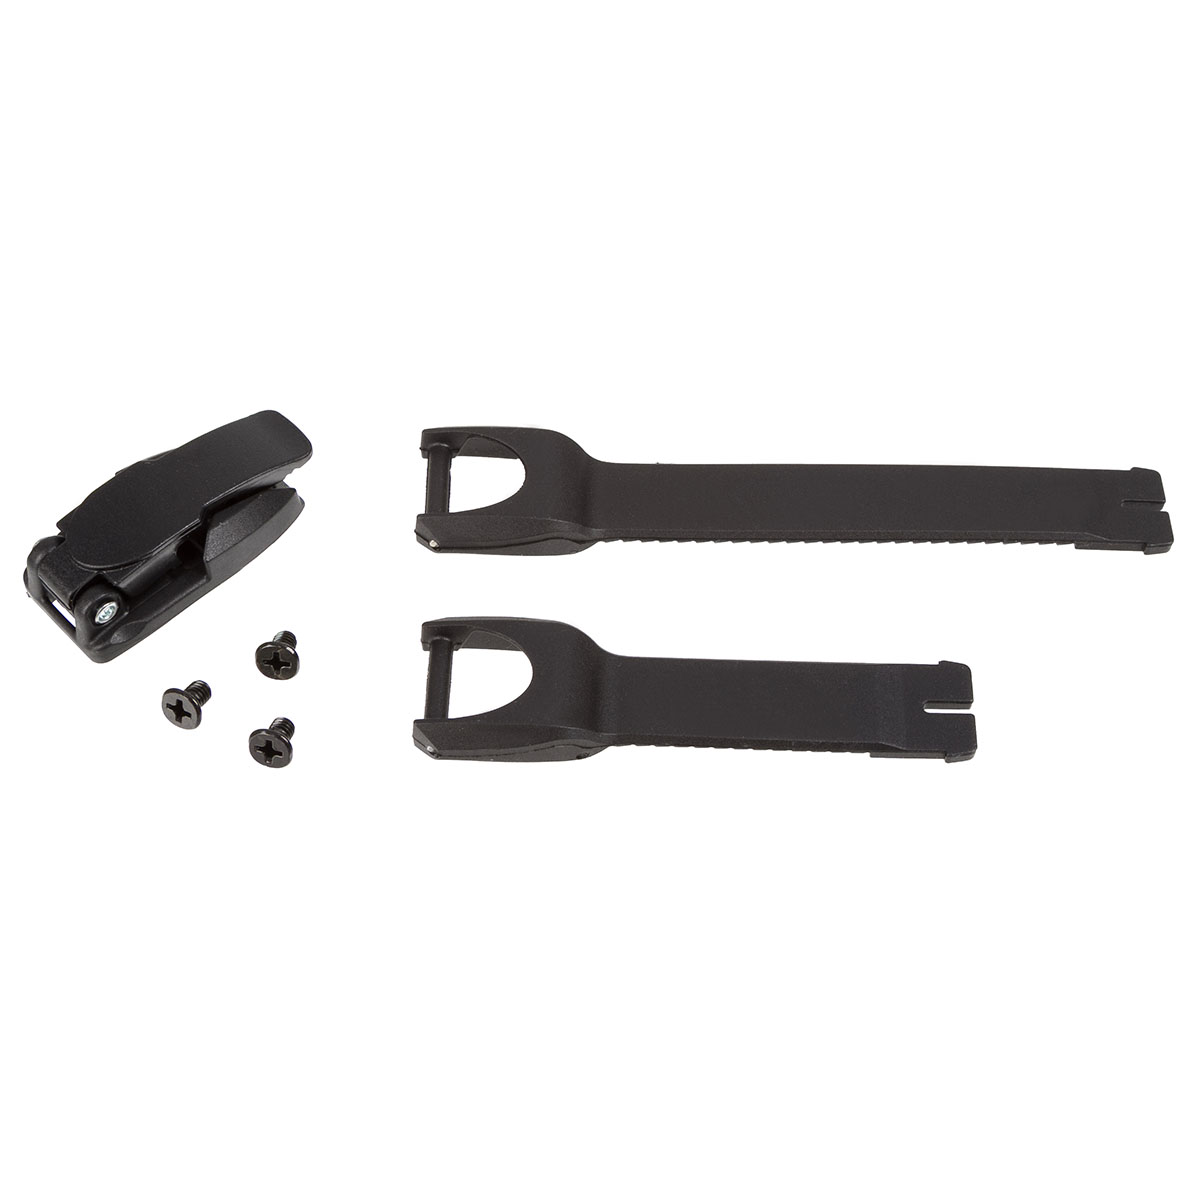 Gaerne Replacement Strap Kit G-Adventure/Cypher Black